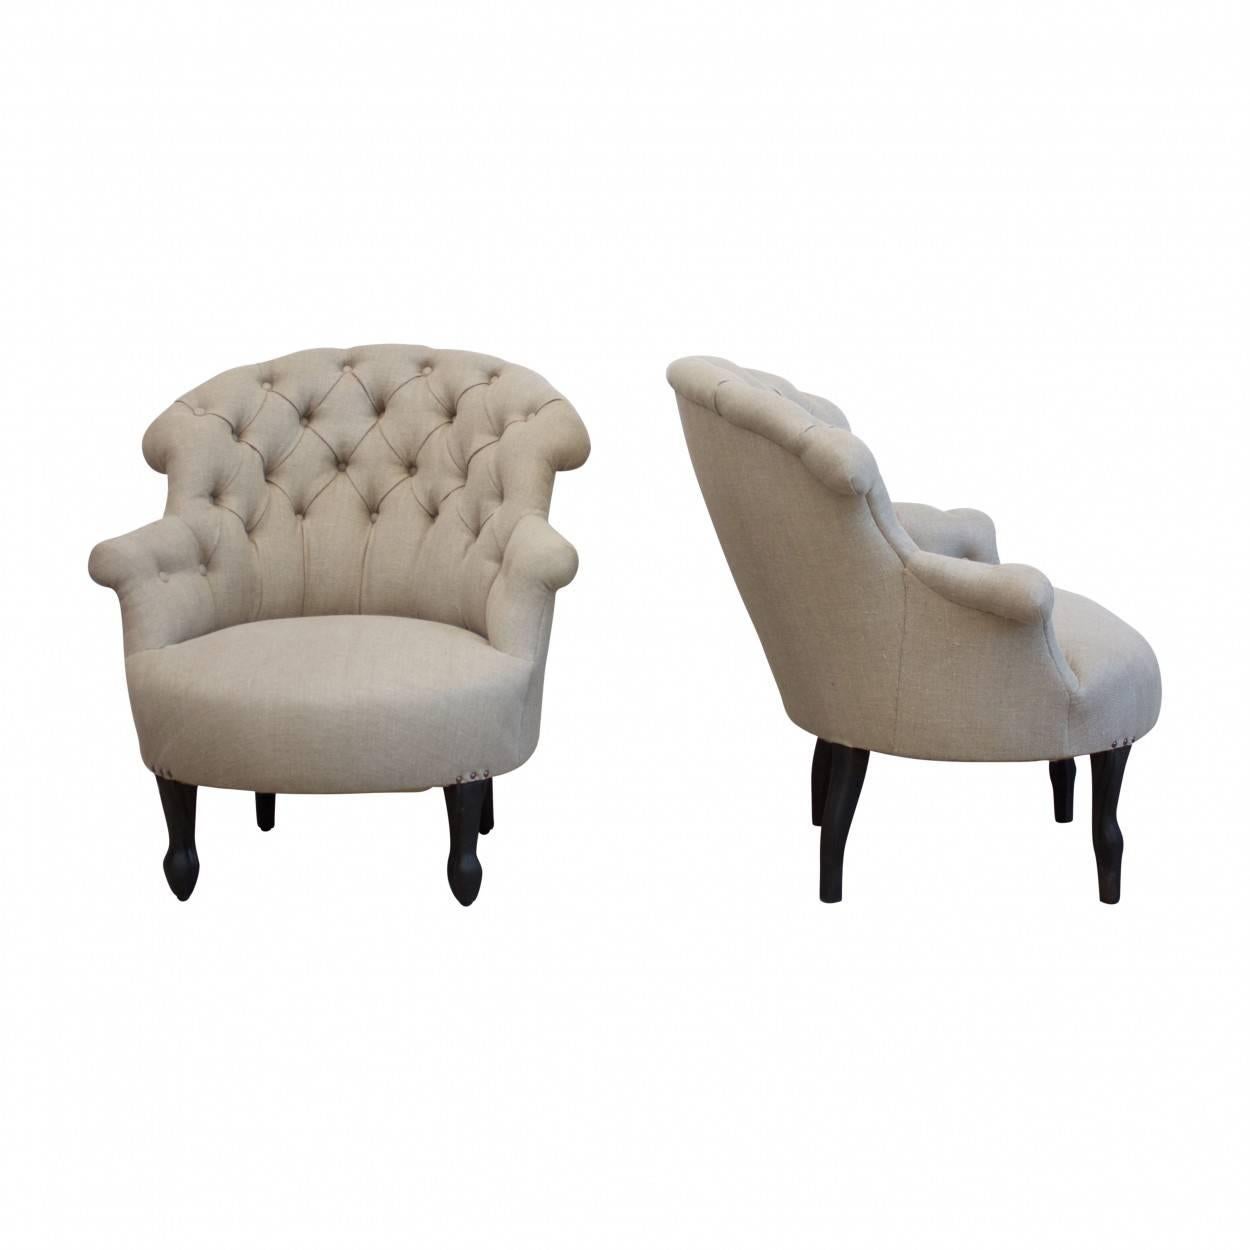 A near matching pair of French armchairs which have been newly upholstered in a beautiful natural linen fabric.

One chair is circa 1900 whilst the other is a very good quality chair from circa 1950.

Measures: 83cm high, 79cm wide and 70cm deep.